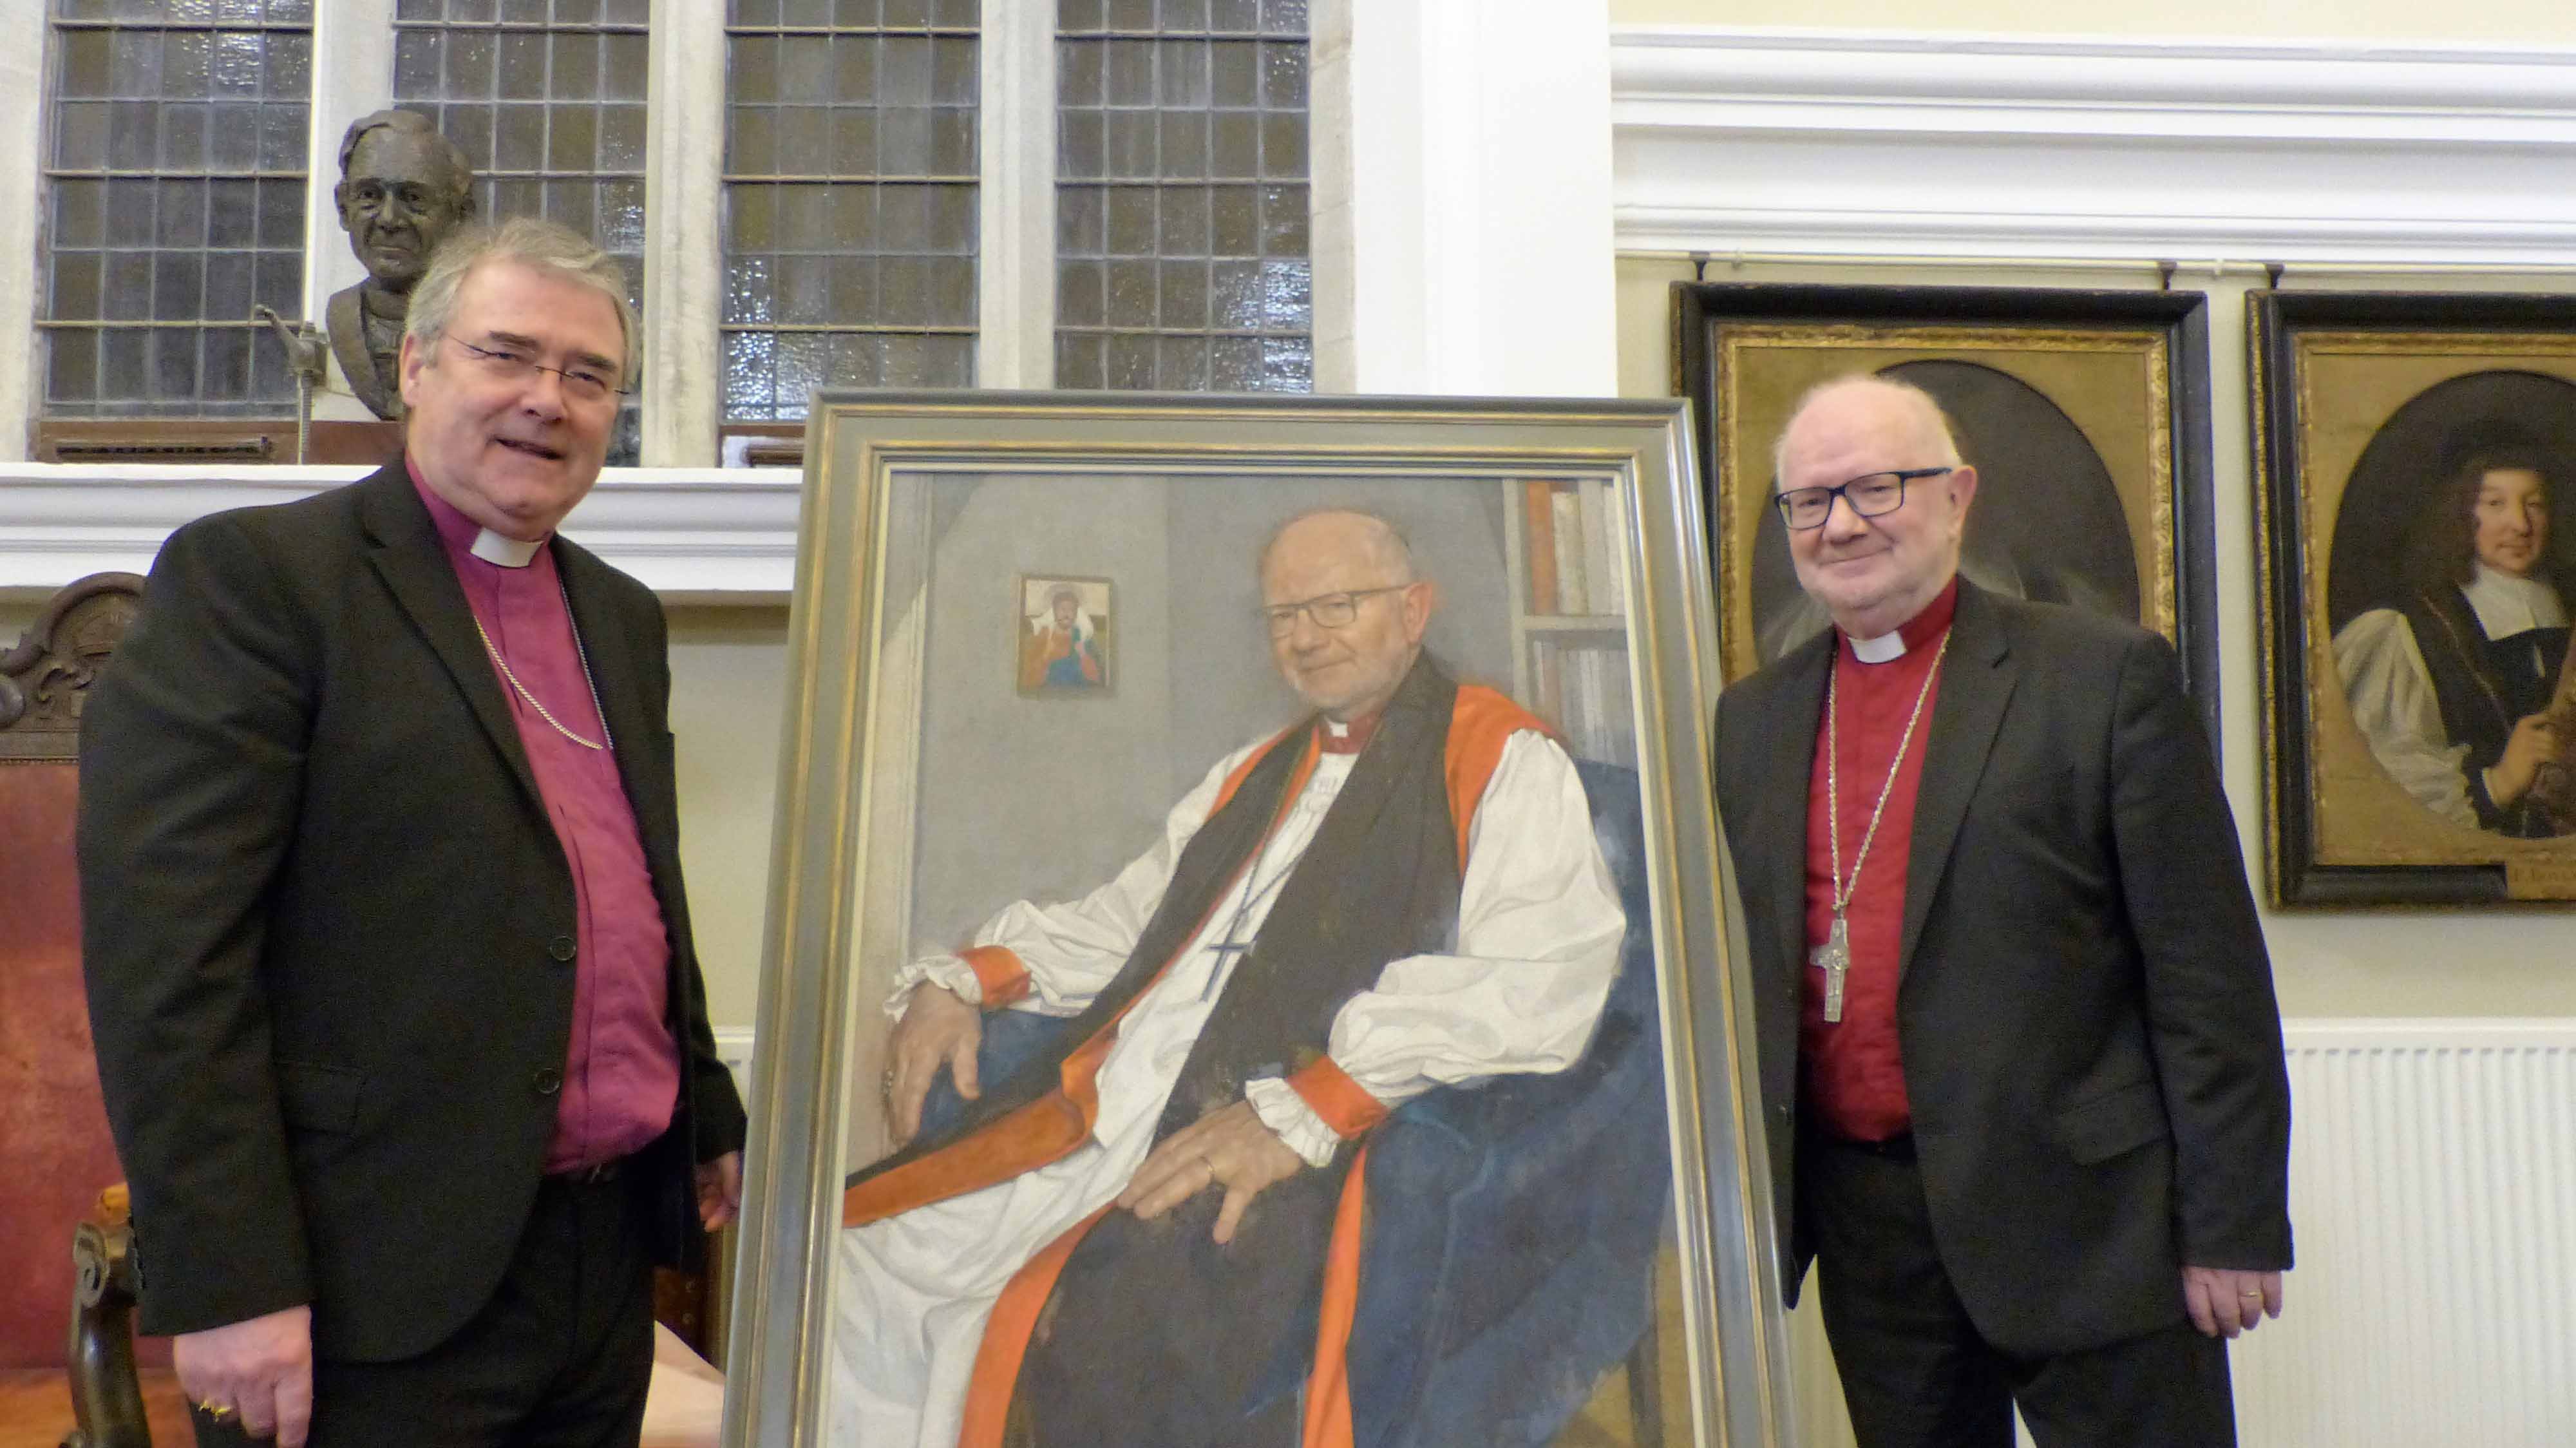 Archbishop John McDowell with Bishop Richard Clarke at the unveiling of Bishop Clarke's portrait at Church House, Armagh, which marks his service as Primate of All Ireland and Archbishop of Armagh between 2012 and 2020.